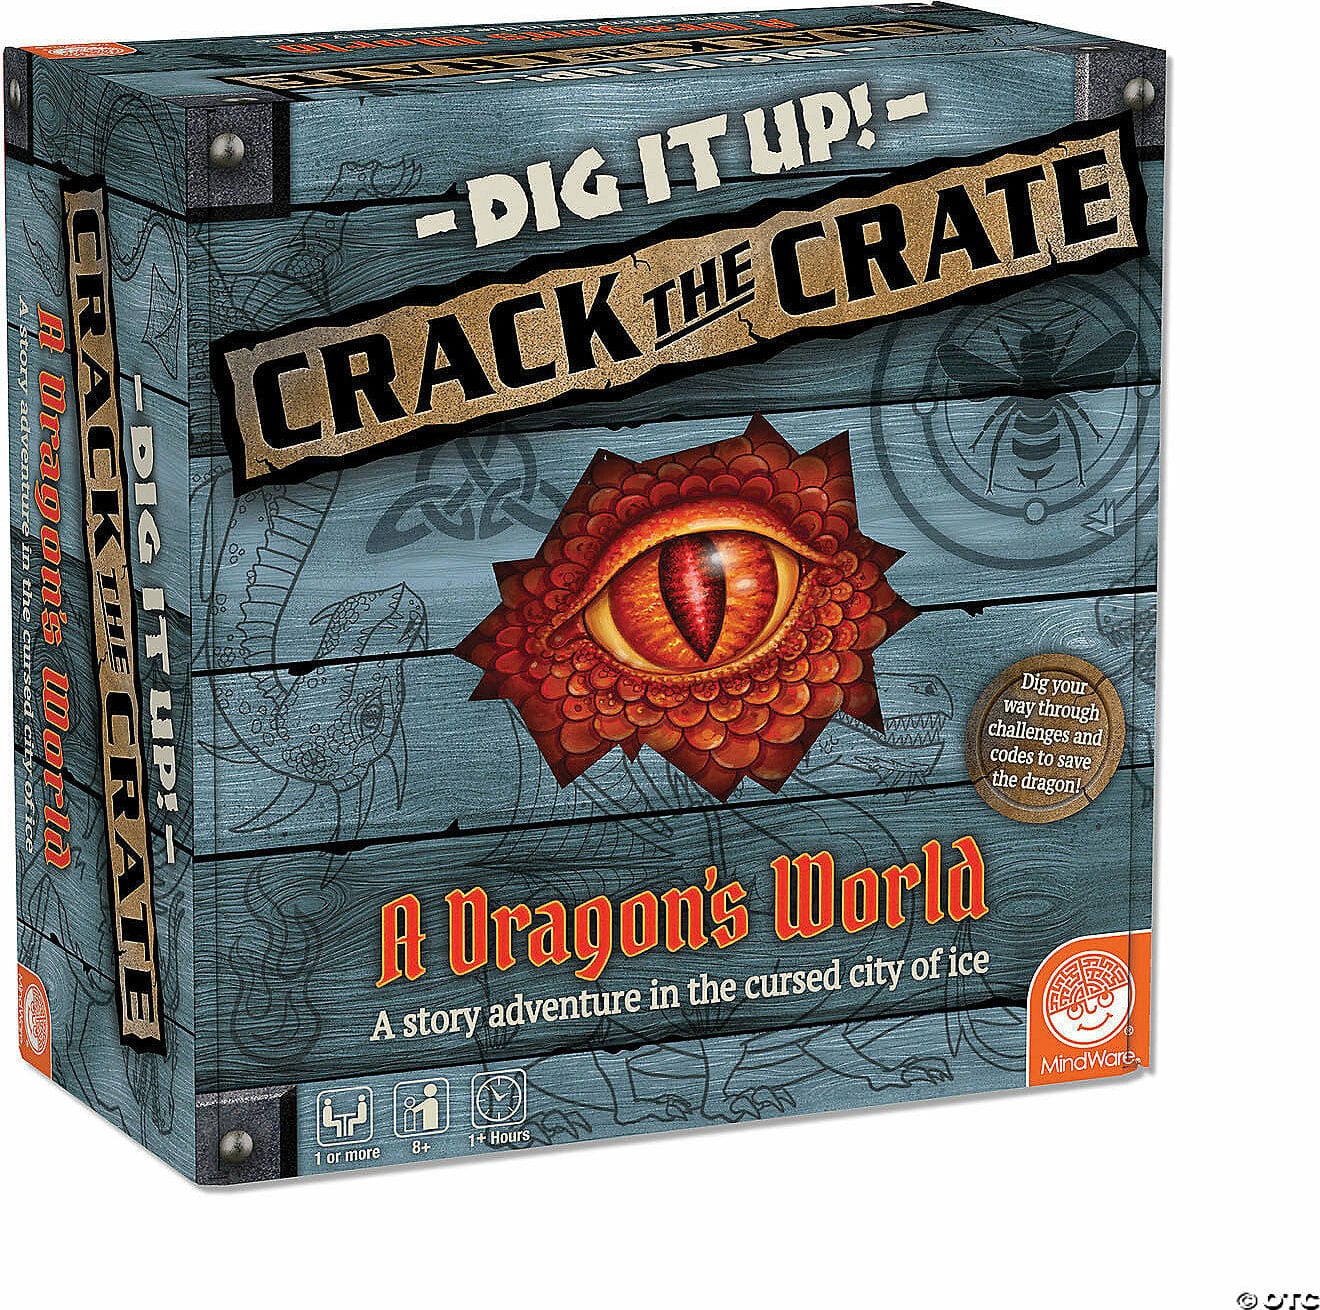 Dig It Up! Crack the Crate - A Dragon's World - Story Adventure Game - Saltire Games